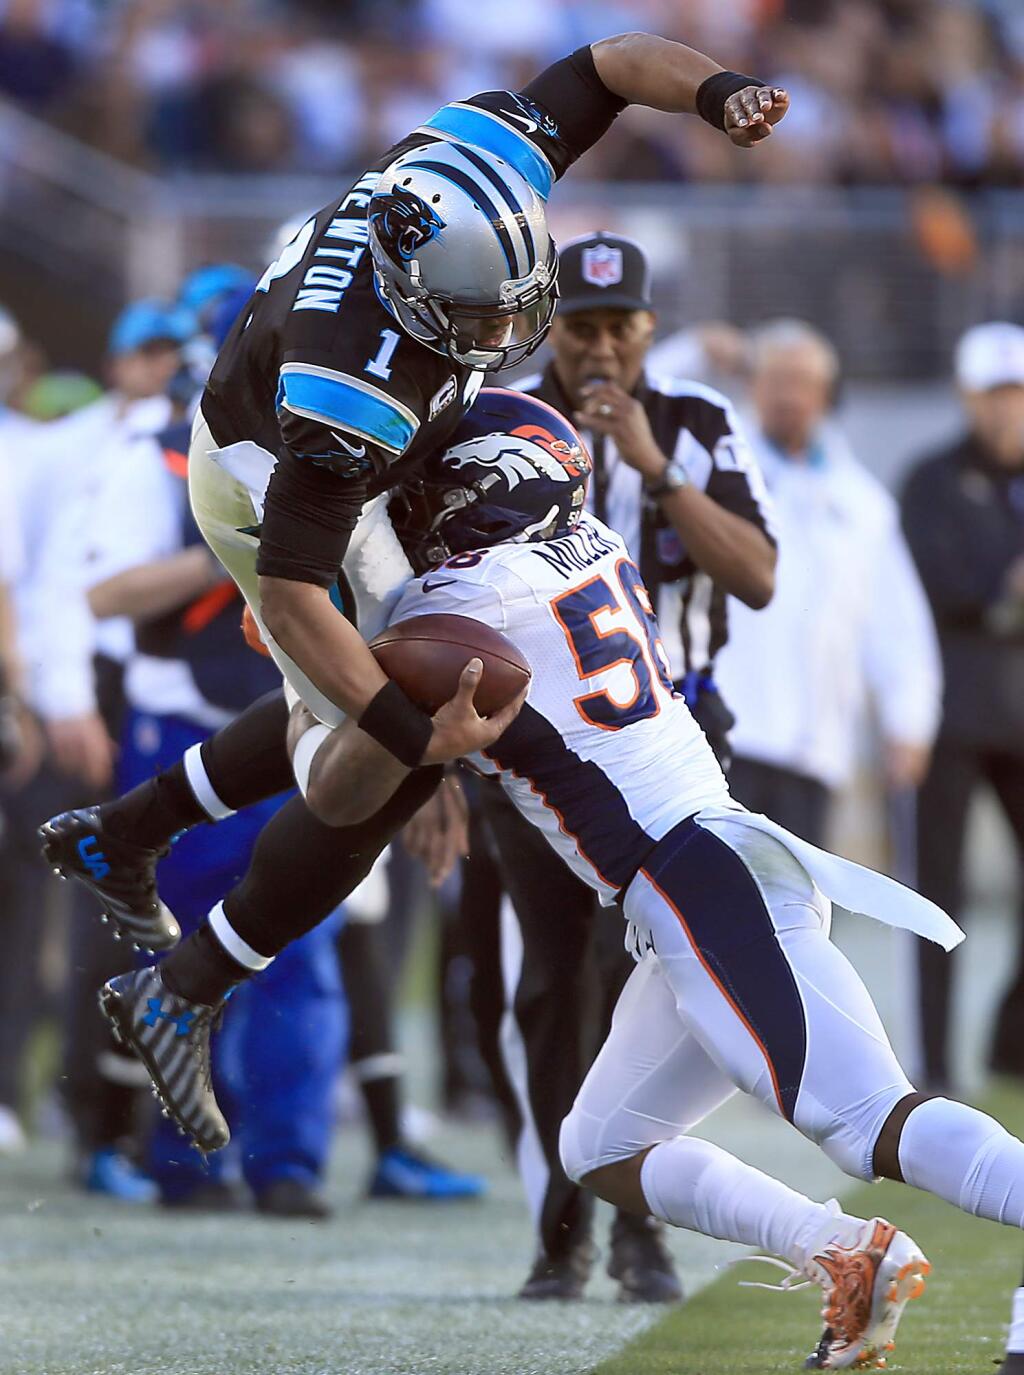 Cam Newton of the Panthers is tackled out of bounds by Von Miller of the Broncos during Super Bowl 50, Sunday Feb. 7, 2016 at Levi's Stadium in Santa Clara. (Kent Porter / Press Democrat ) 2016